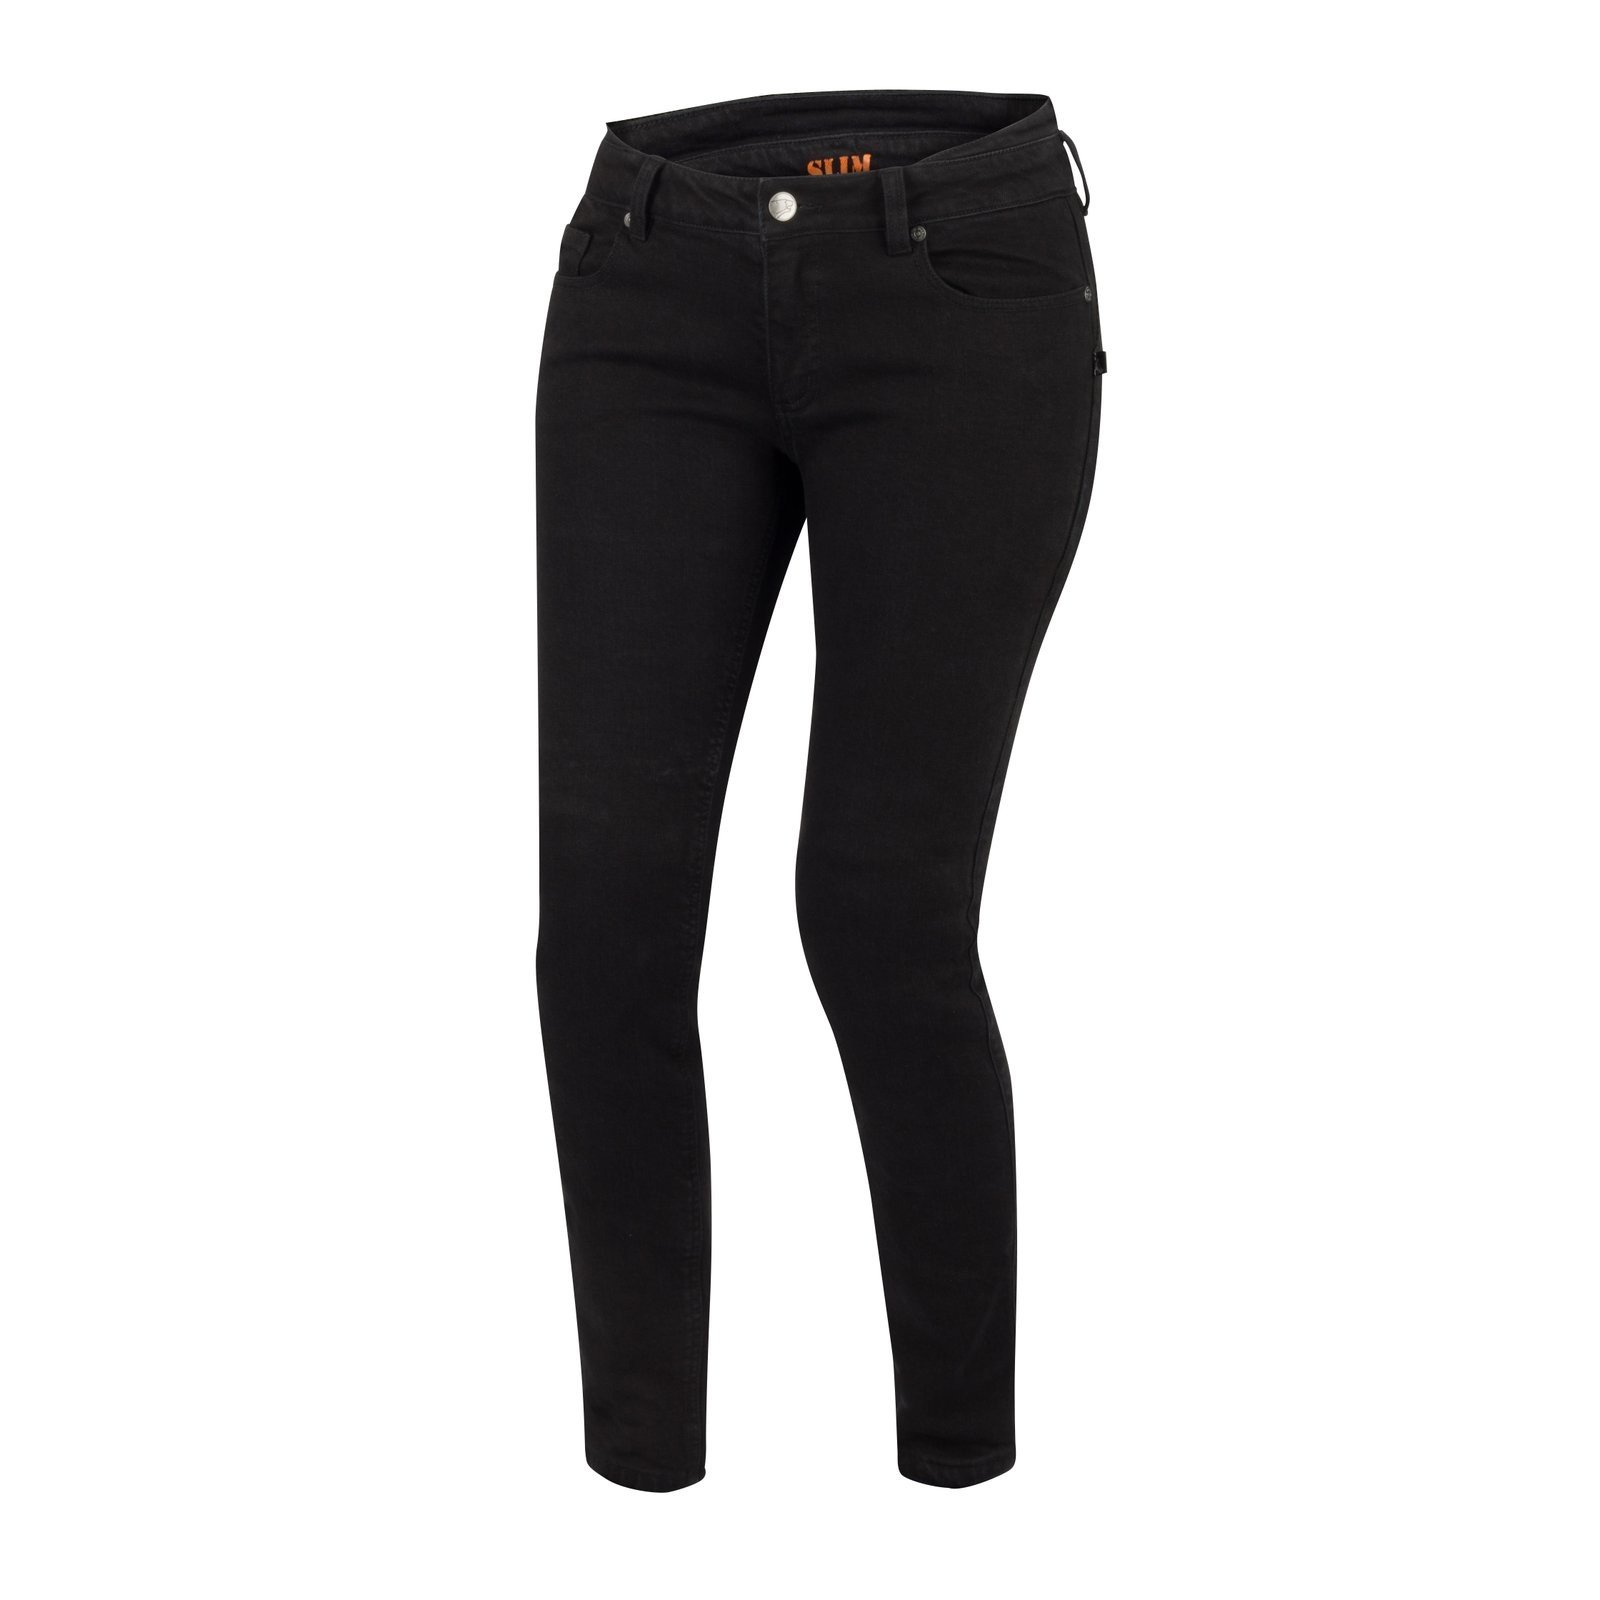 Image of Bering Patricia Lady Black Pants Size T0 ID 3660815157152